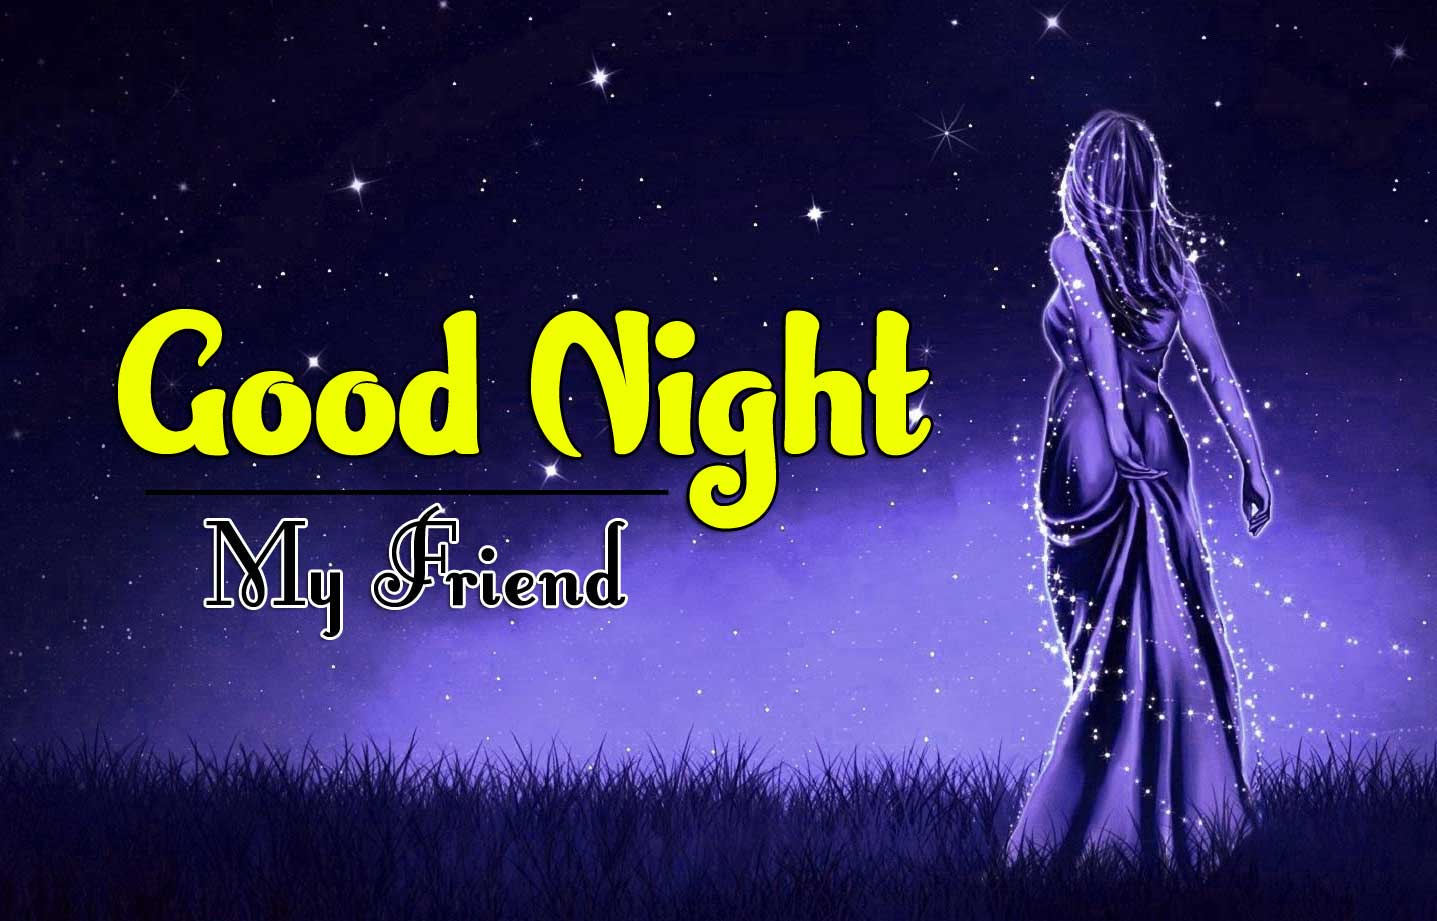 Good Night Images- 410+ Photo Pics Wallpaper Pictures For Whatsapp